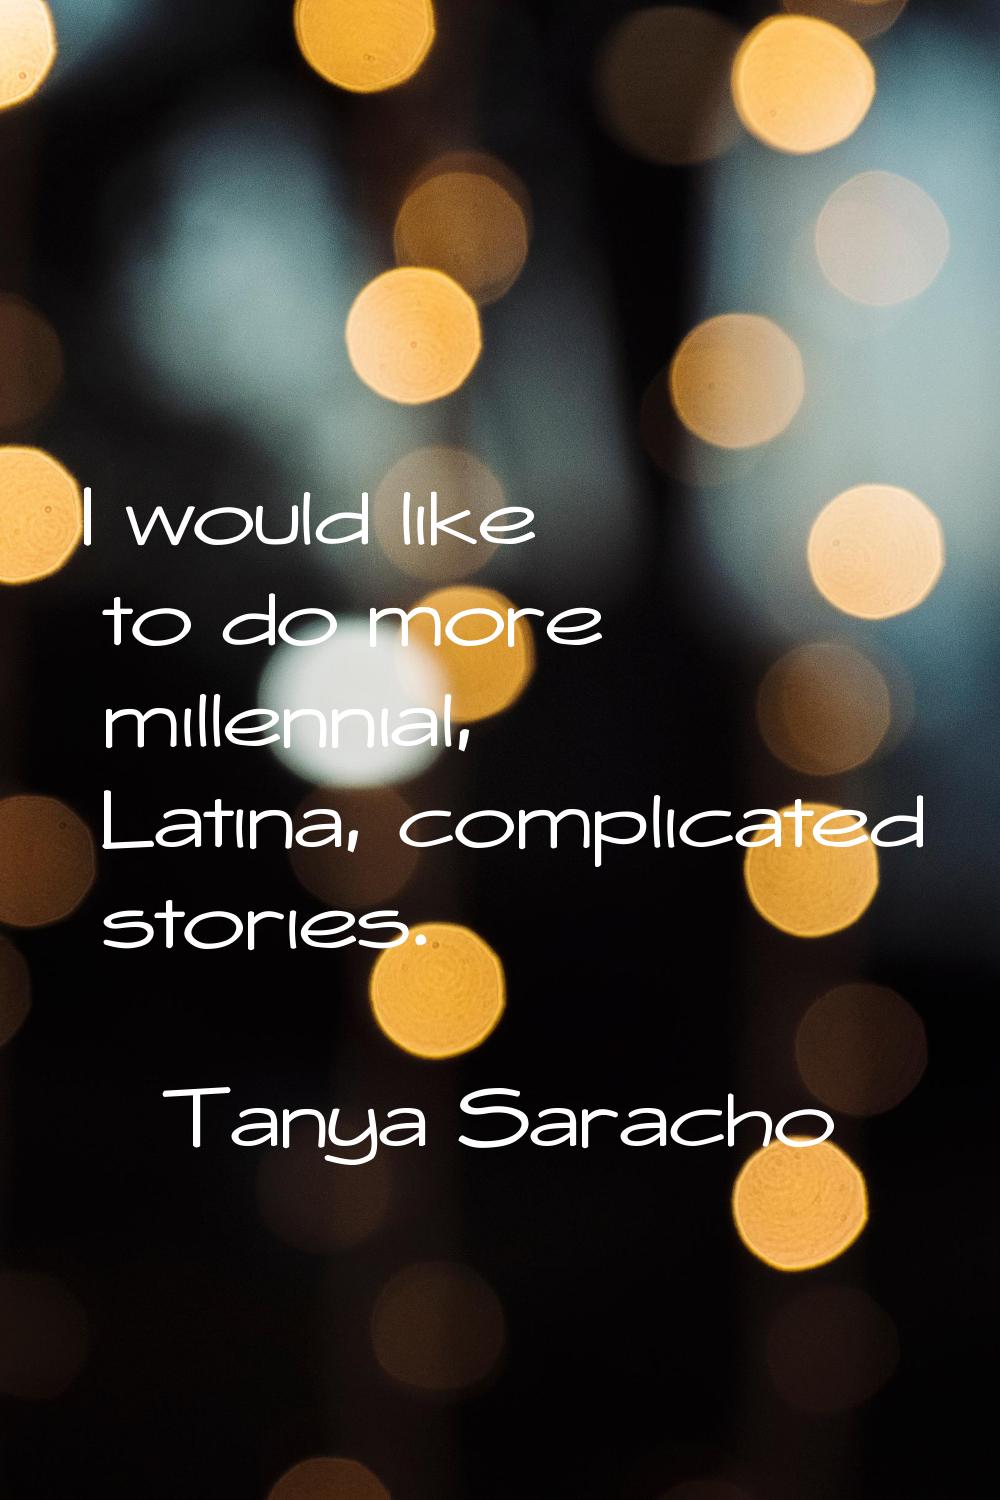 I would like to do more millennial, Latina, complicated stories.